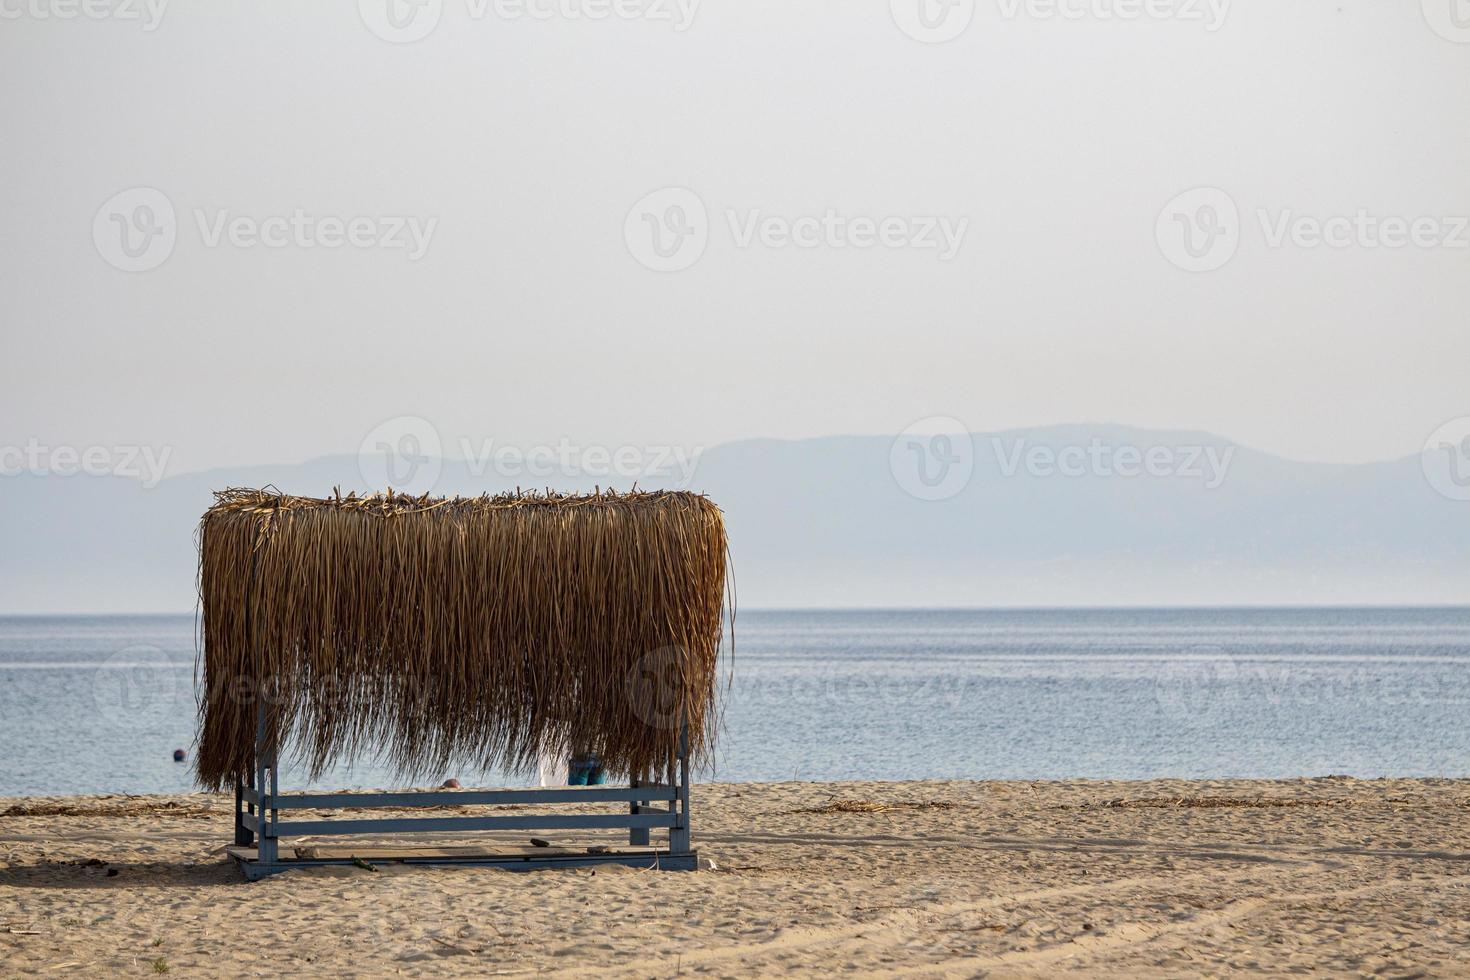 The cozy bungalow at the beach. Bungalow of bamboo. Sea background photo